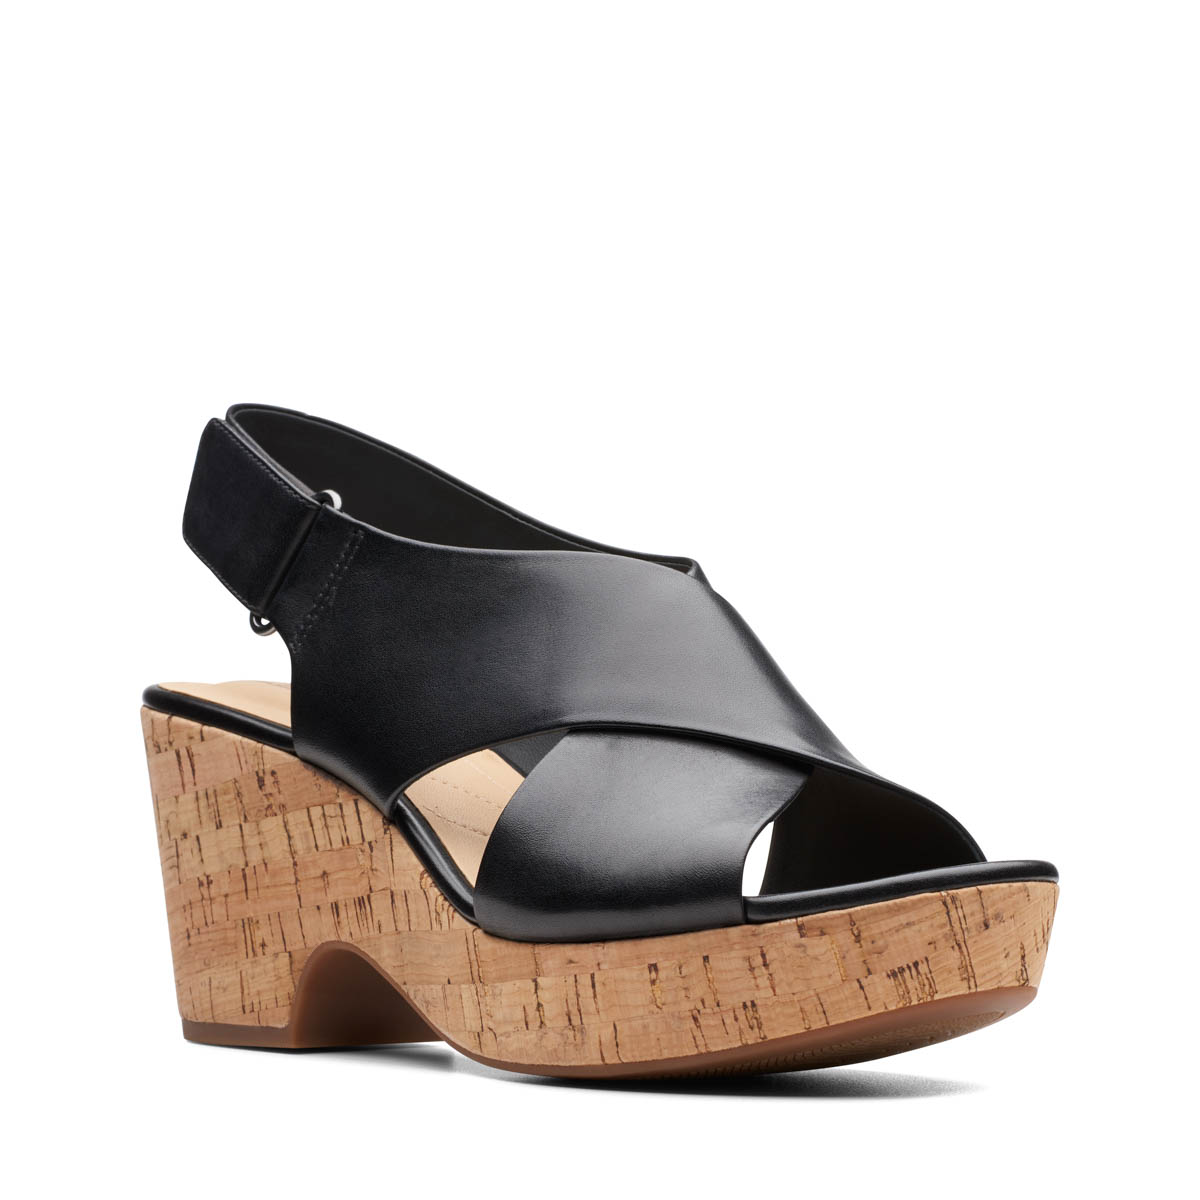 clarks leather wedge sandals